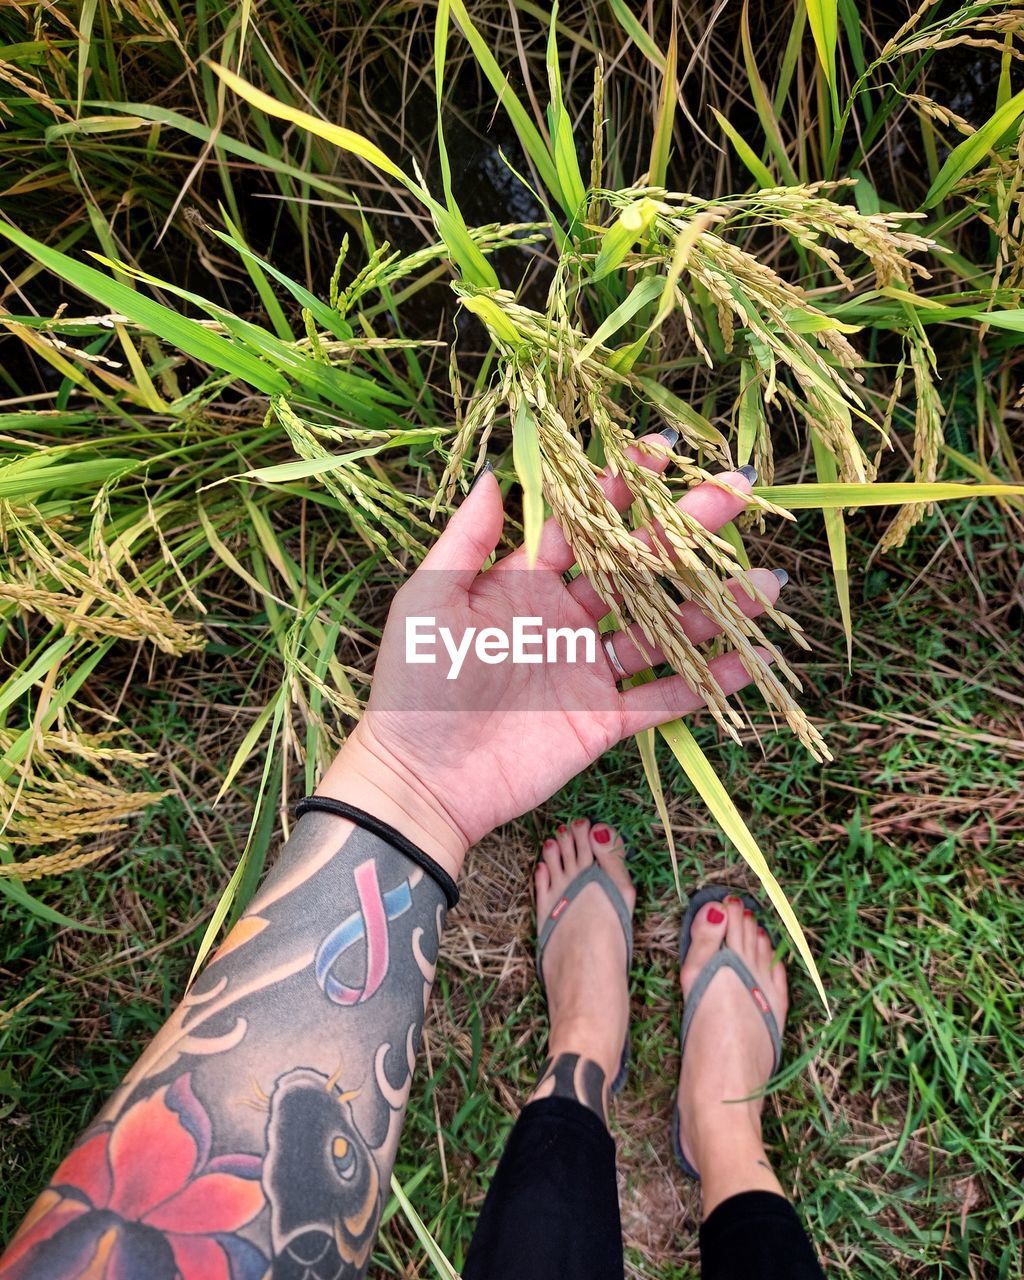 grass, one person, green, plant, personal perspective, flower, high angle view, human leg, lifestyles, low section, nature, soil, adult, field, day, land, leaf, leisure activity, shoe, lawn, hand, women, growth, outdoors, tree, limb, human limb, standing, footwear, men, clothing, directly above